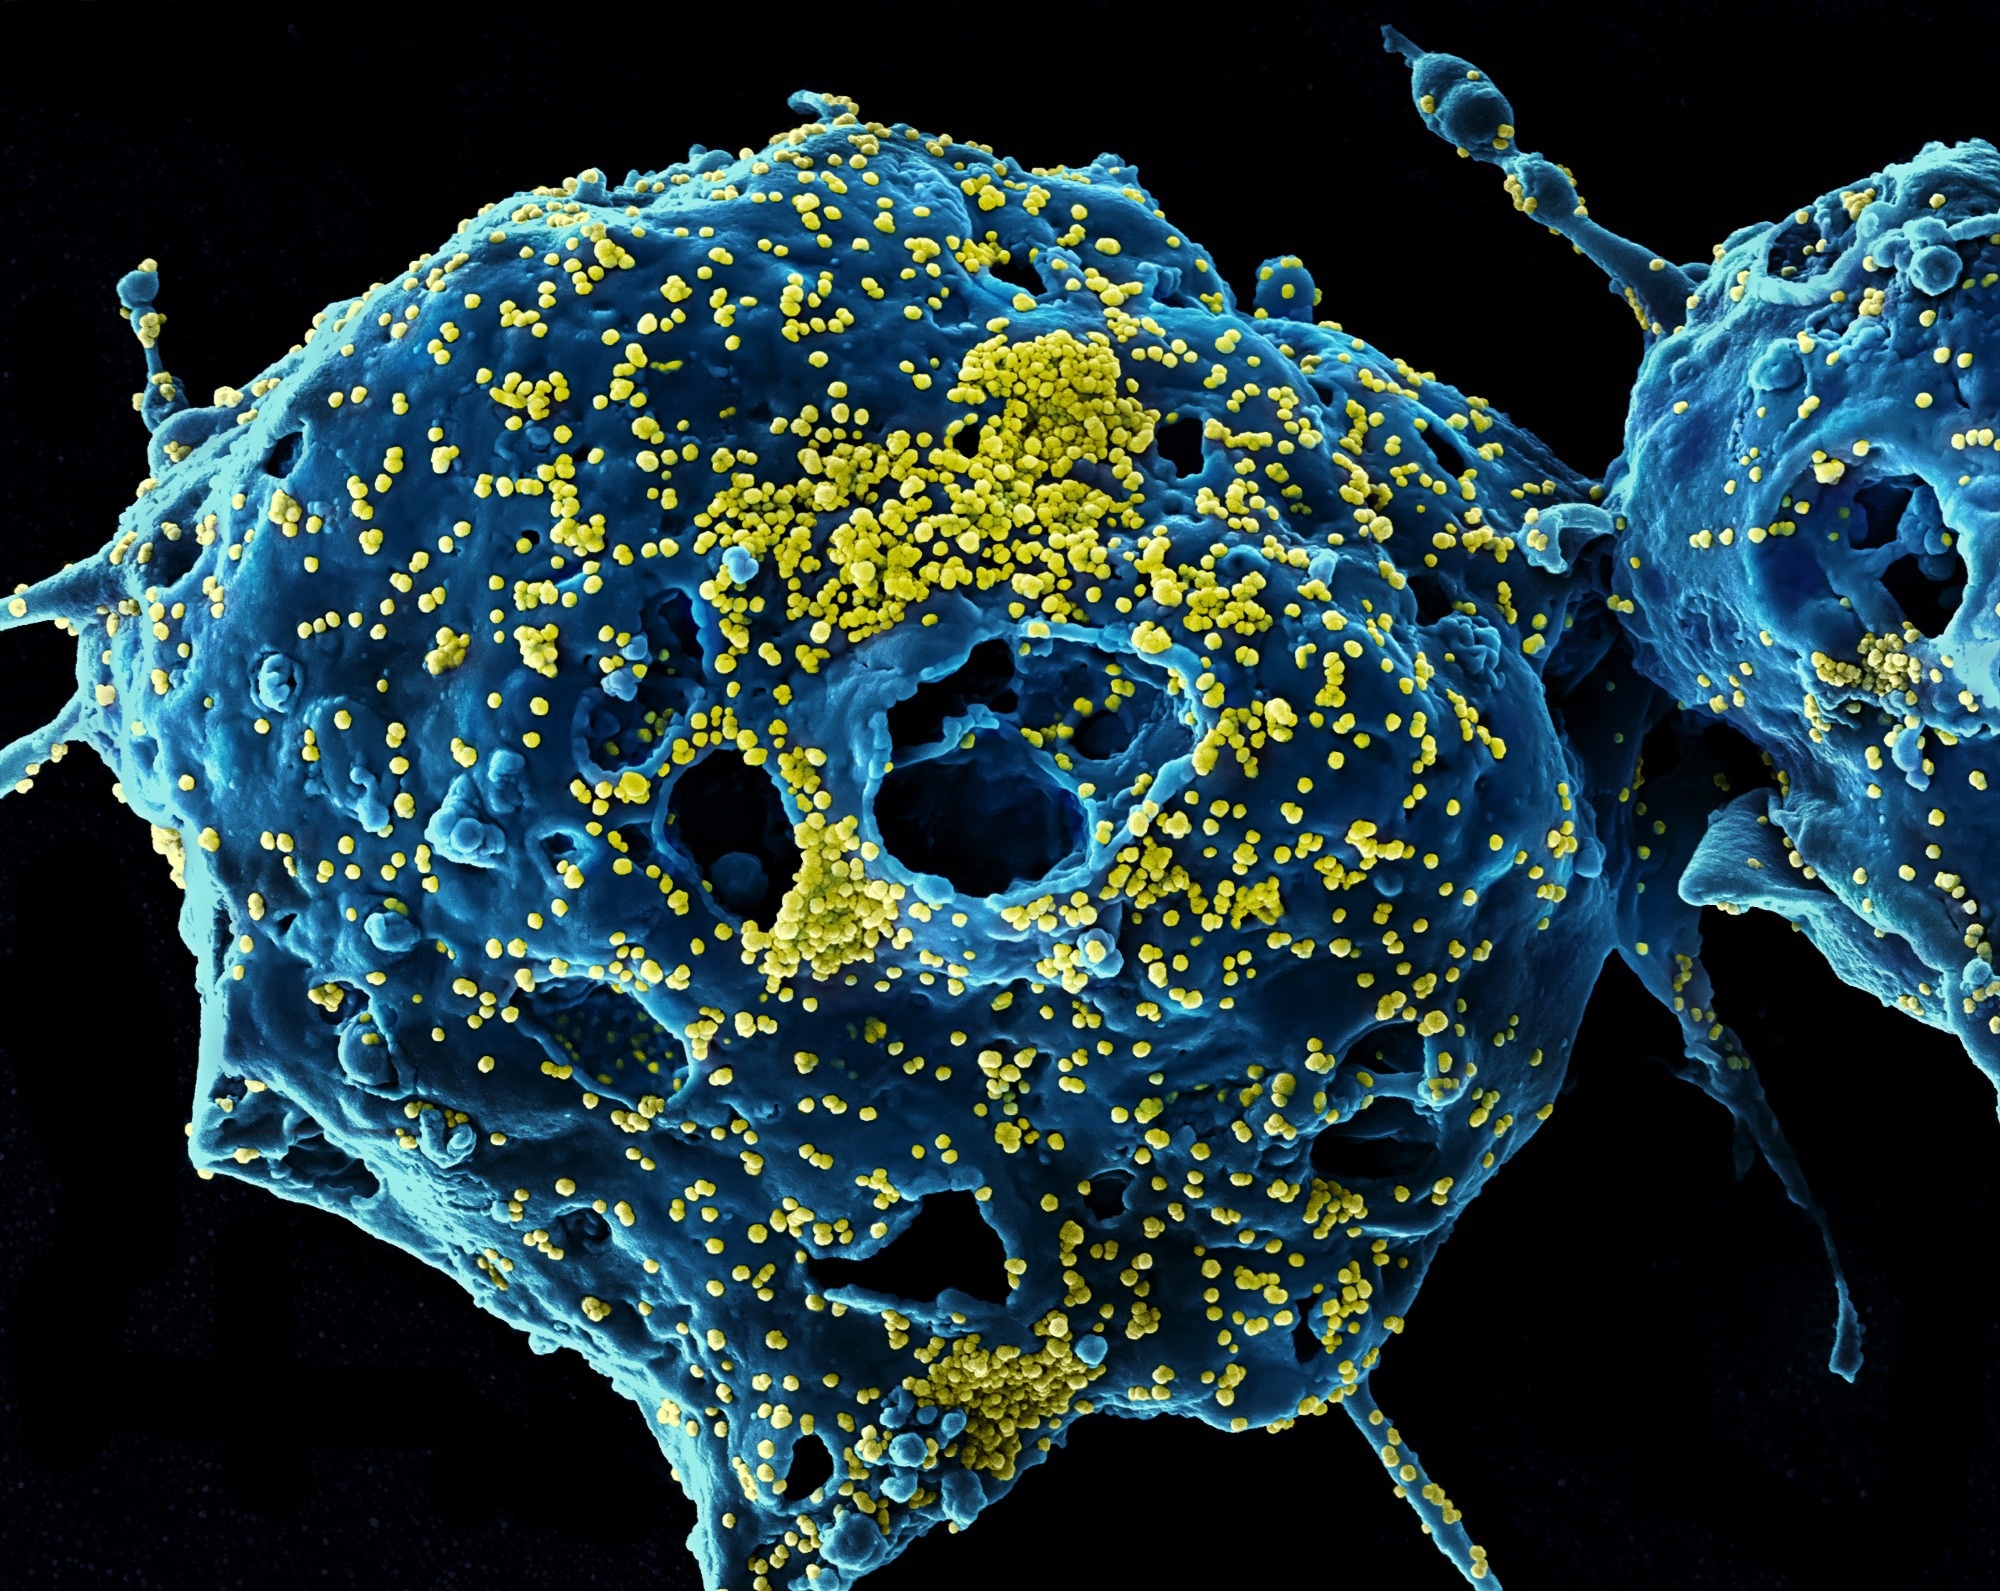 MERS Virus Particles Colorized scanning electron micrograph of Middle East Respiratory Syndrome virus particles (yellow) attached to the surface of an infected VERO E6 cell (blue). Image captured and color-enhanced at the NIAID Integrated Research Facility in Fort Detrick, Maryland. Credit: NIAID